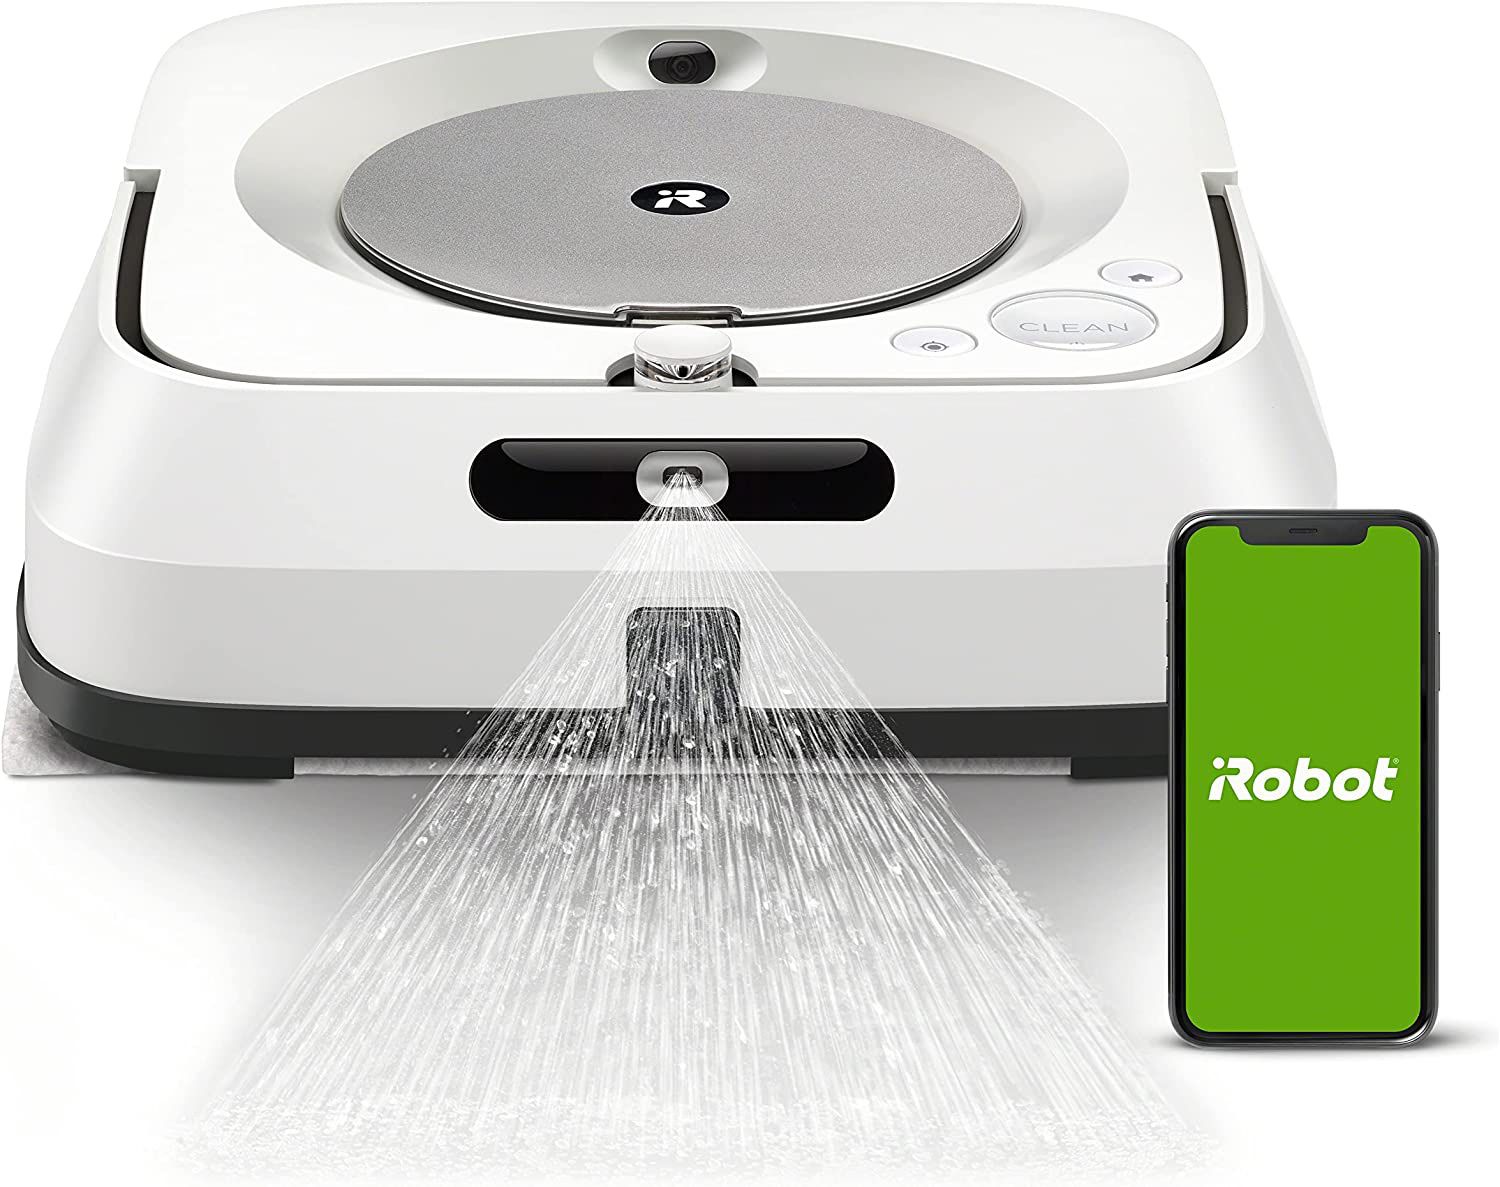 New iRobot Braava Jet M6 Ultimate Robot Mop- Wi-Fi Connected, Precision Jet Spray, Smart Mapping, Works with Alexa, Ideal for Multiple Rooms, Recha